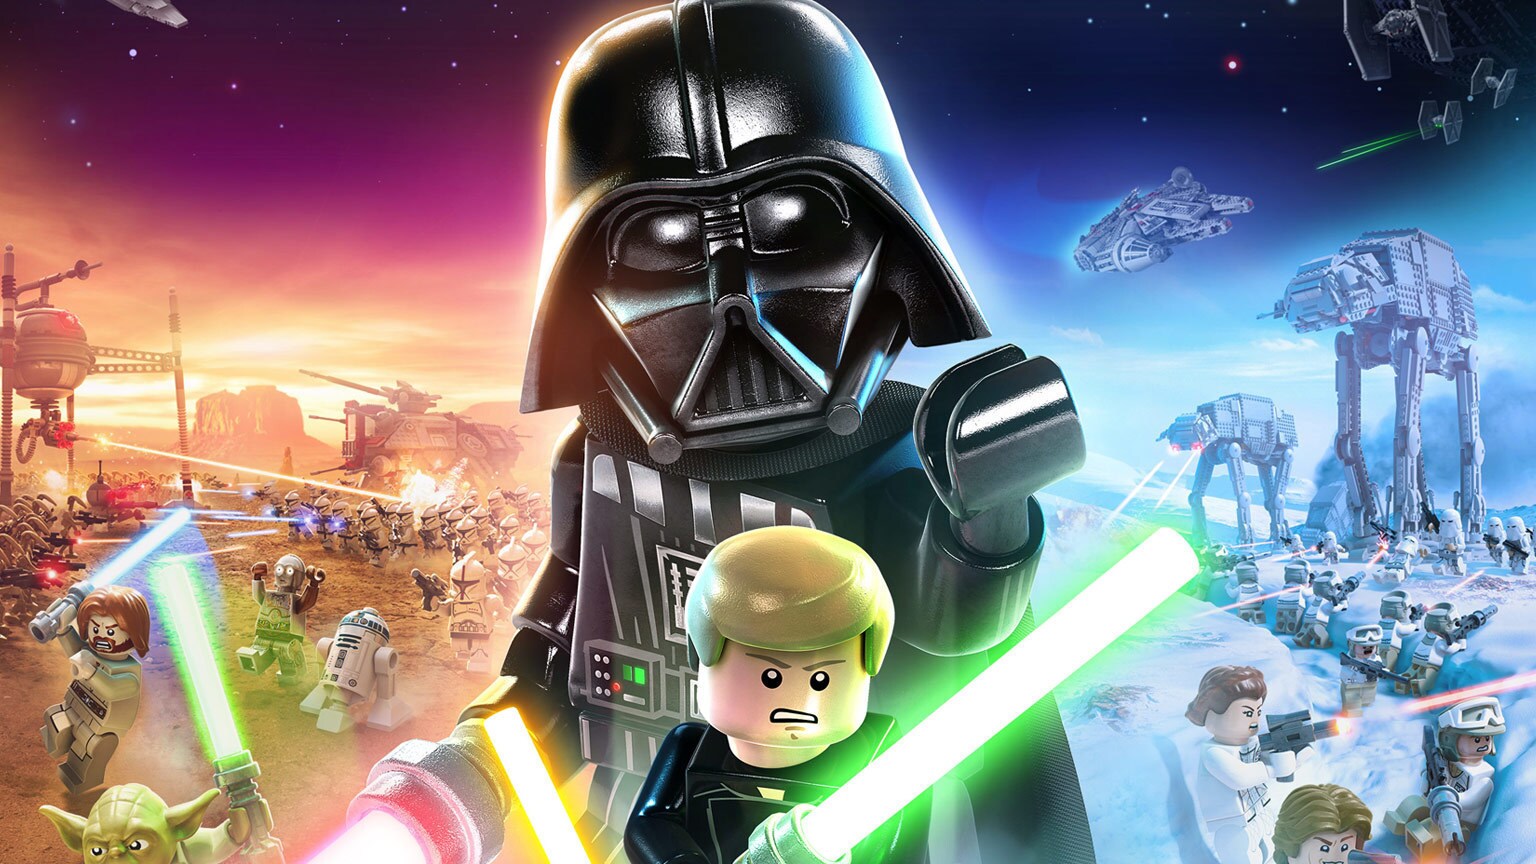 We Were Always Going to Go Big!”: Inside LEGO Star Wars: The